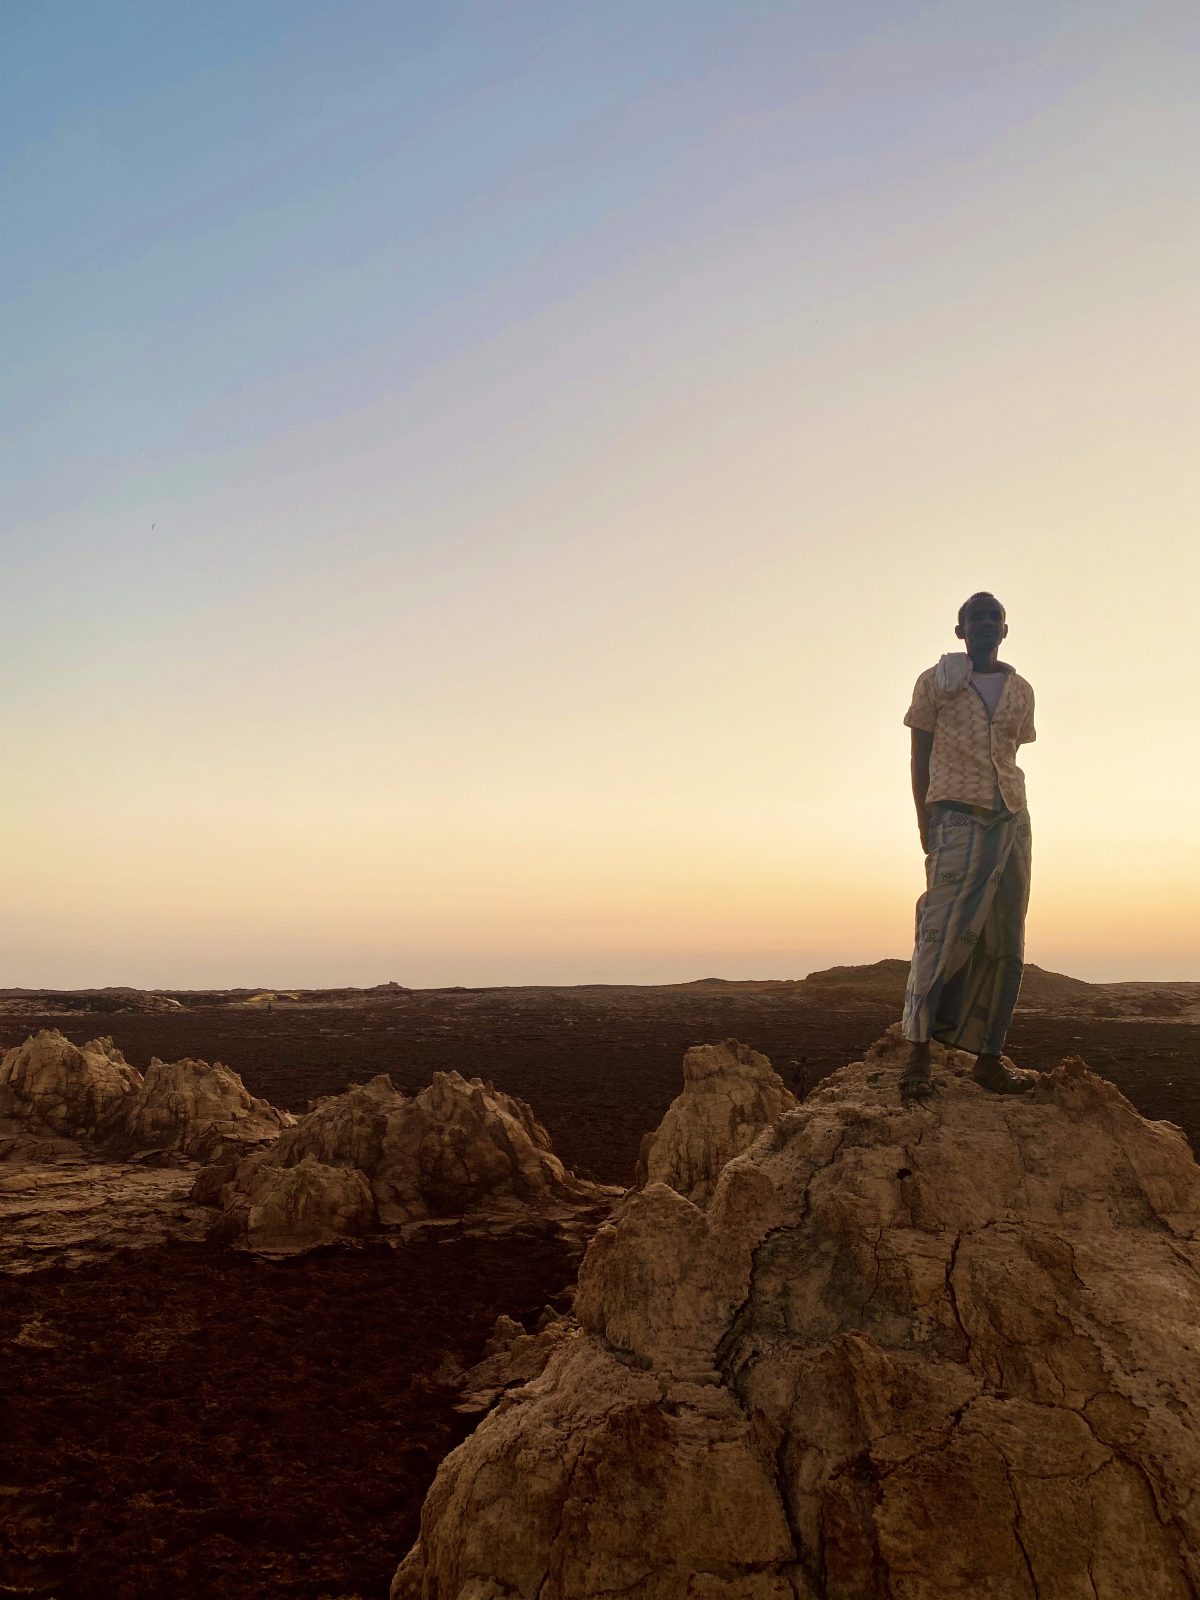 The tribe leader, Aboubakr, stands atop a rock structure in loose clothing. He stands confidently with his hands behind his back as the sun sets behind him